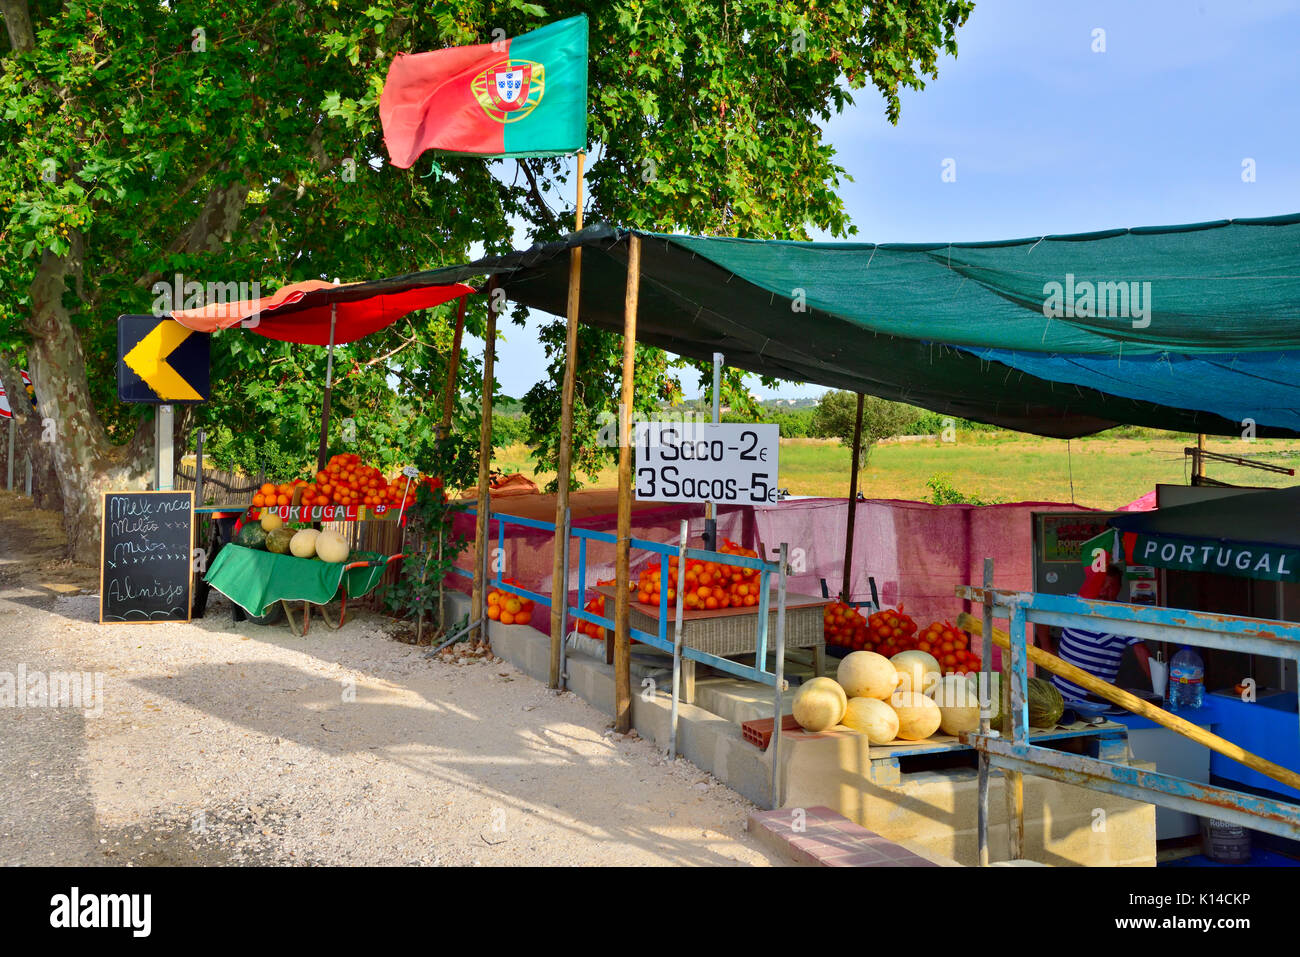 Roadside fruit and vegetable stand, Portugal Stock Photo